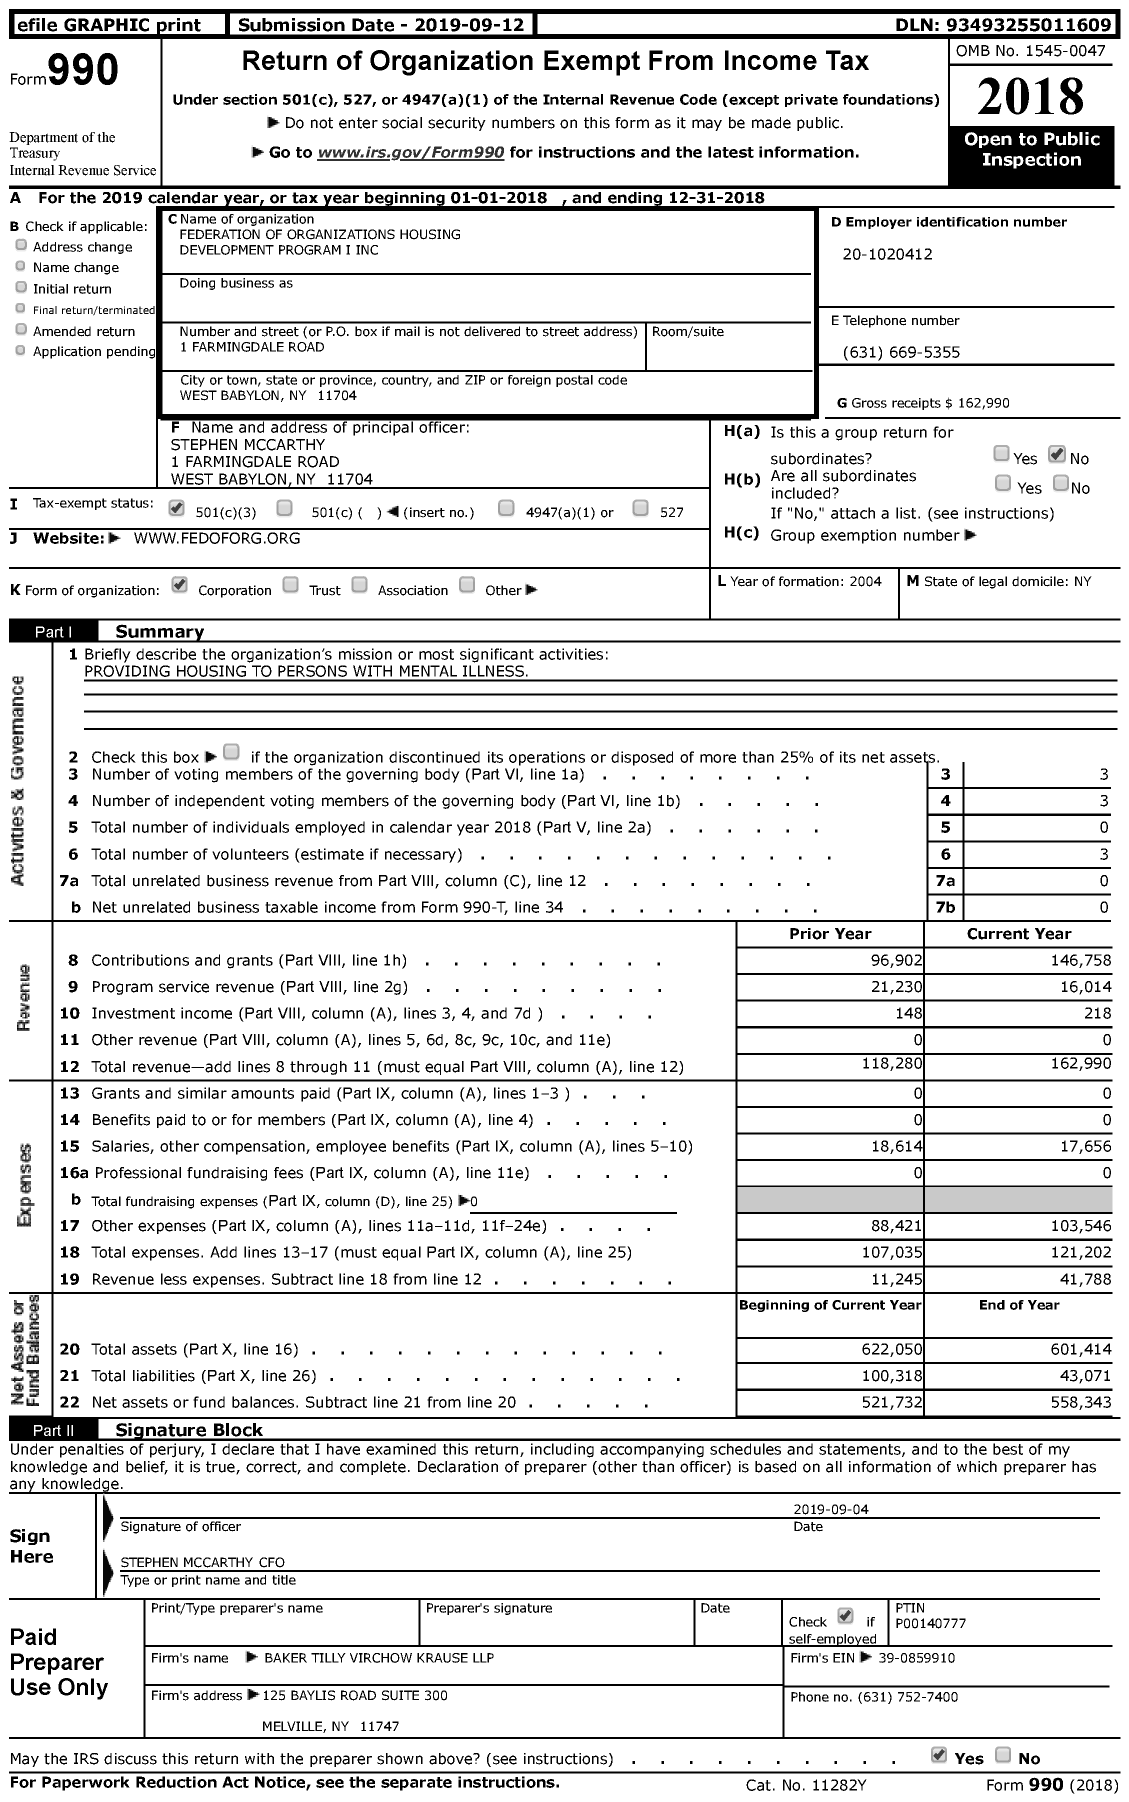 Image of first page of 2018 Form 990 for Federation of Organizations Housing Development Program I